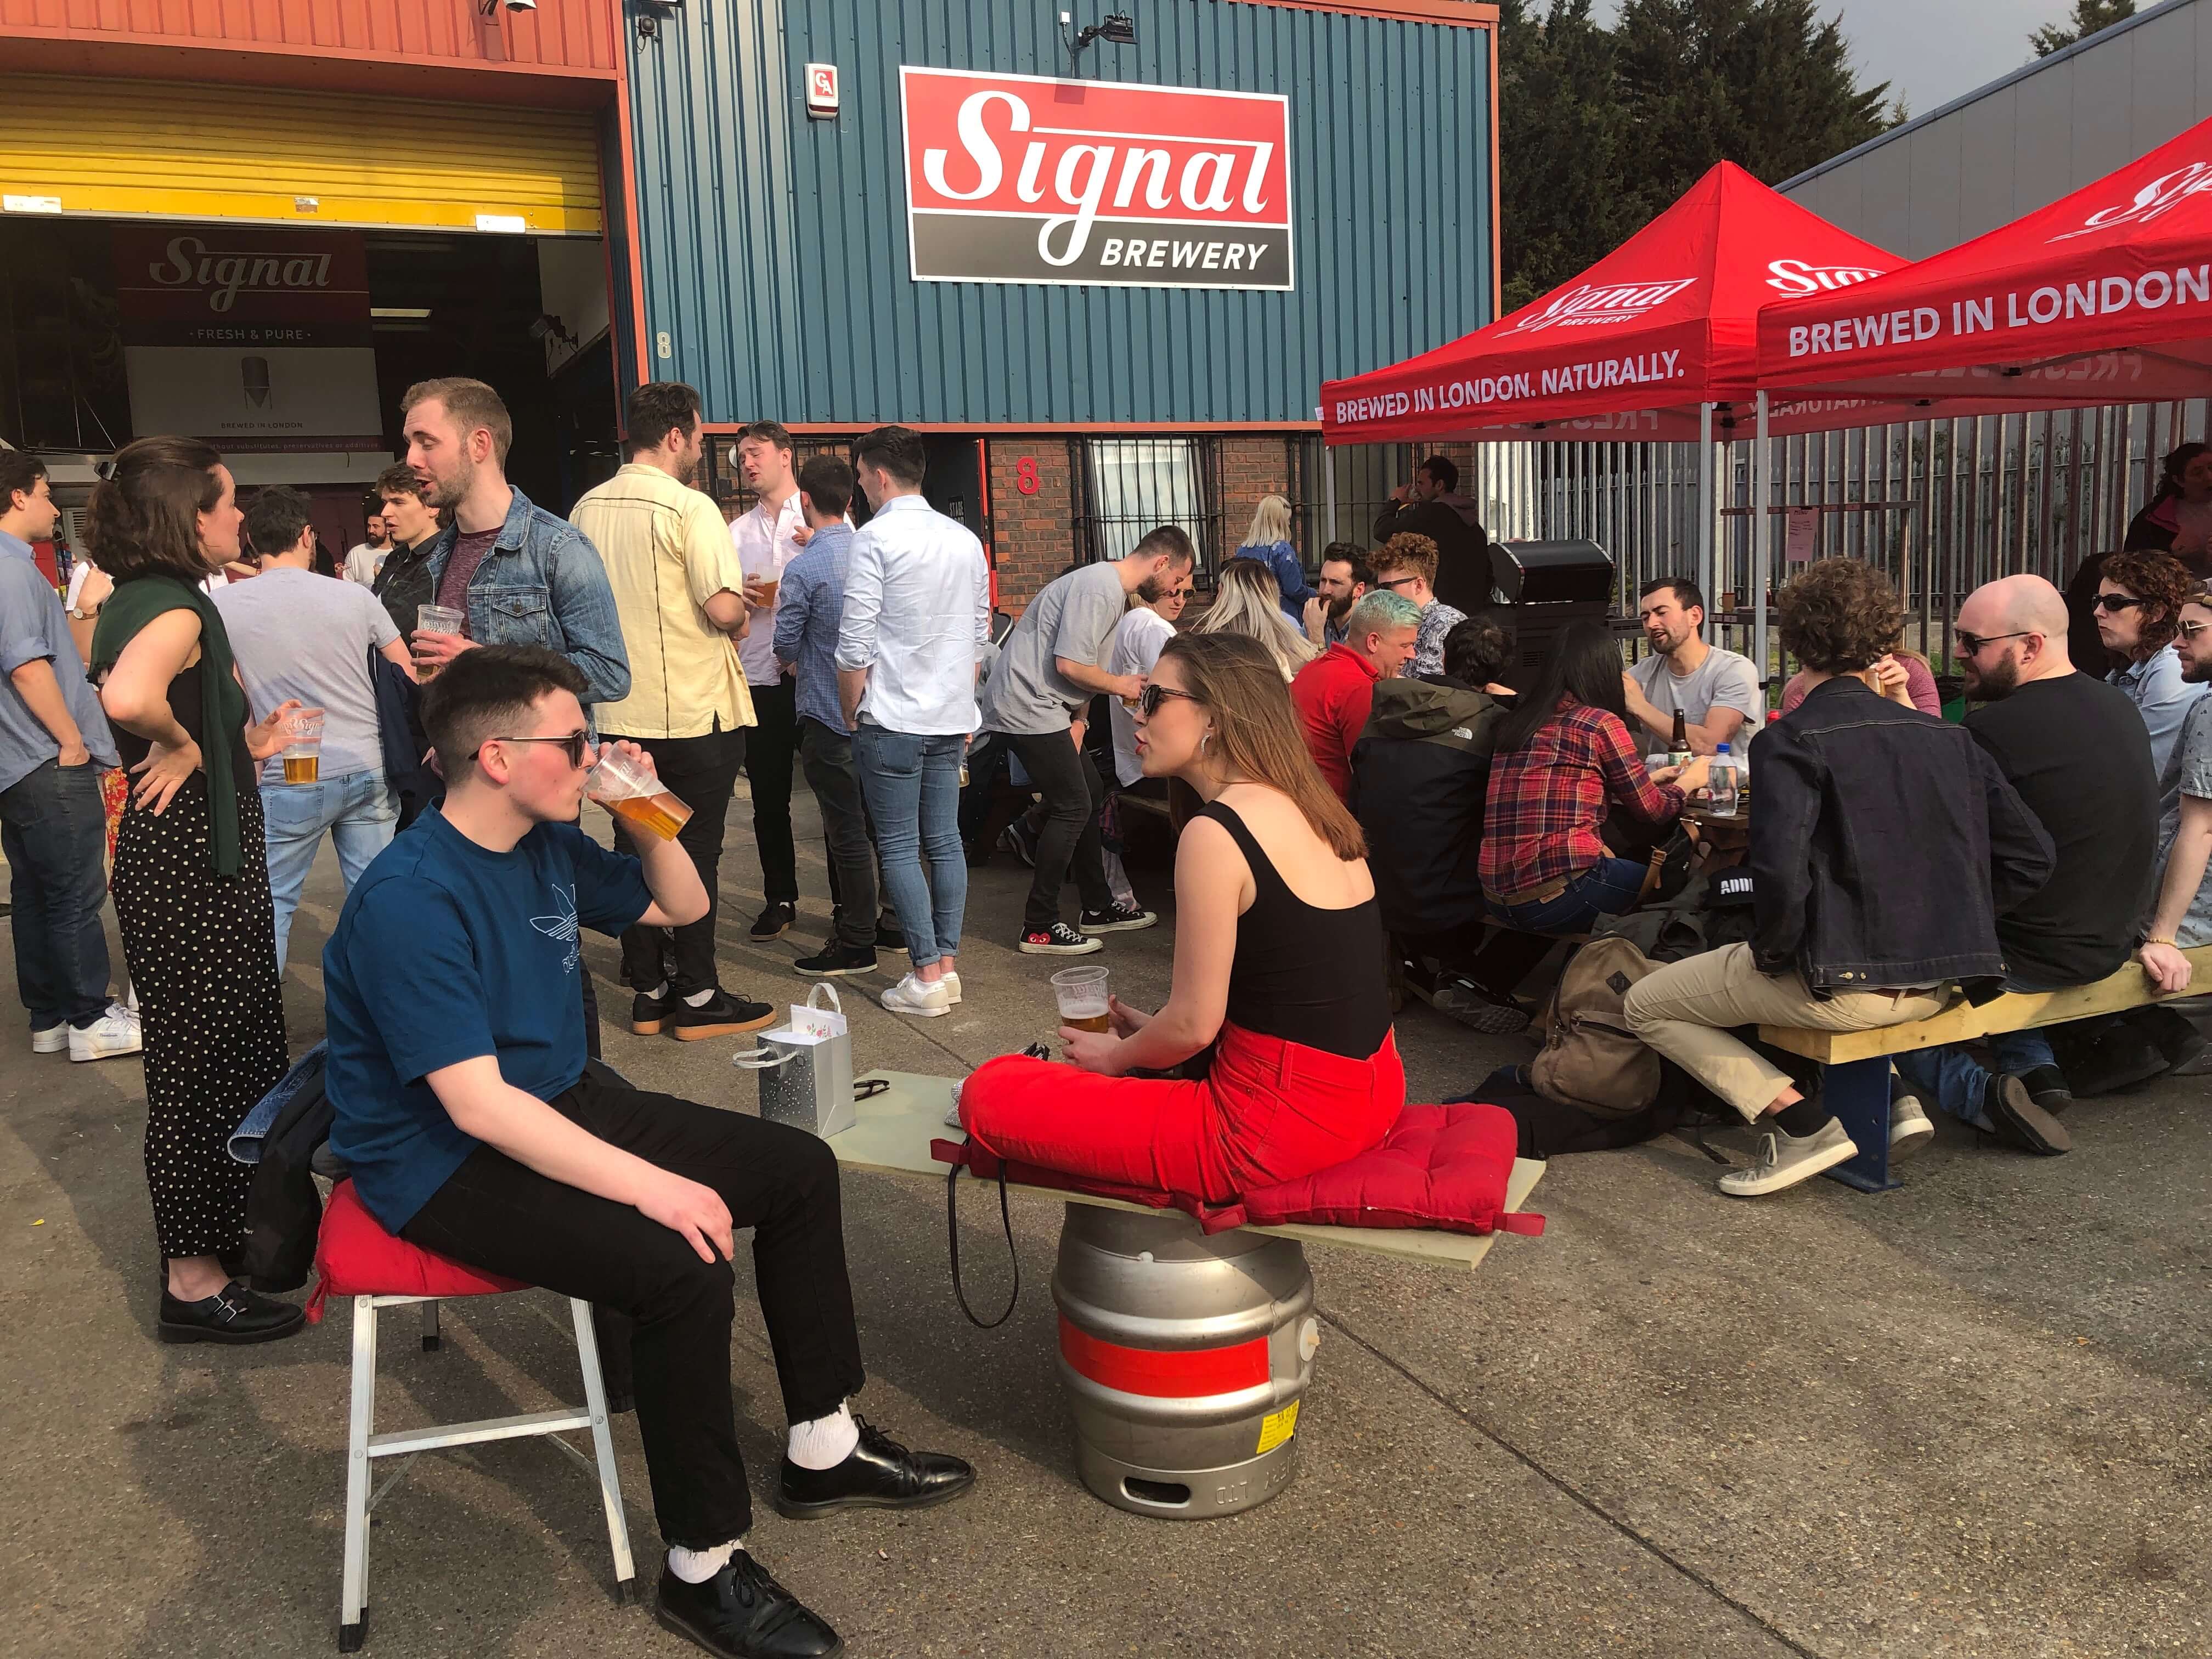 Crowd at Signal Brewery & Taproom, Croydon, South London enjoying beers outside